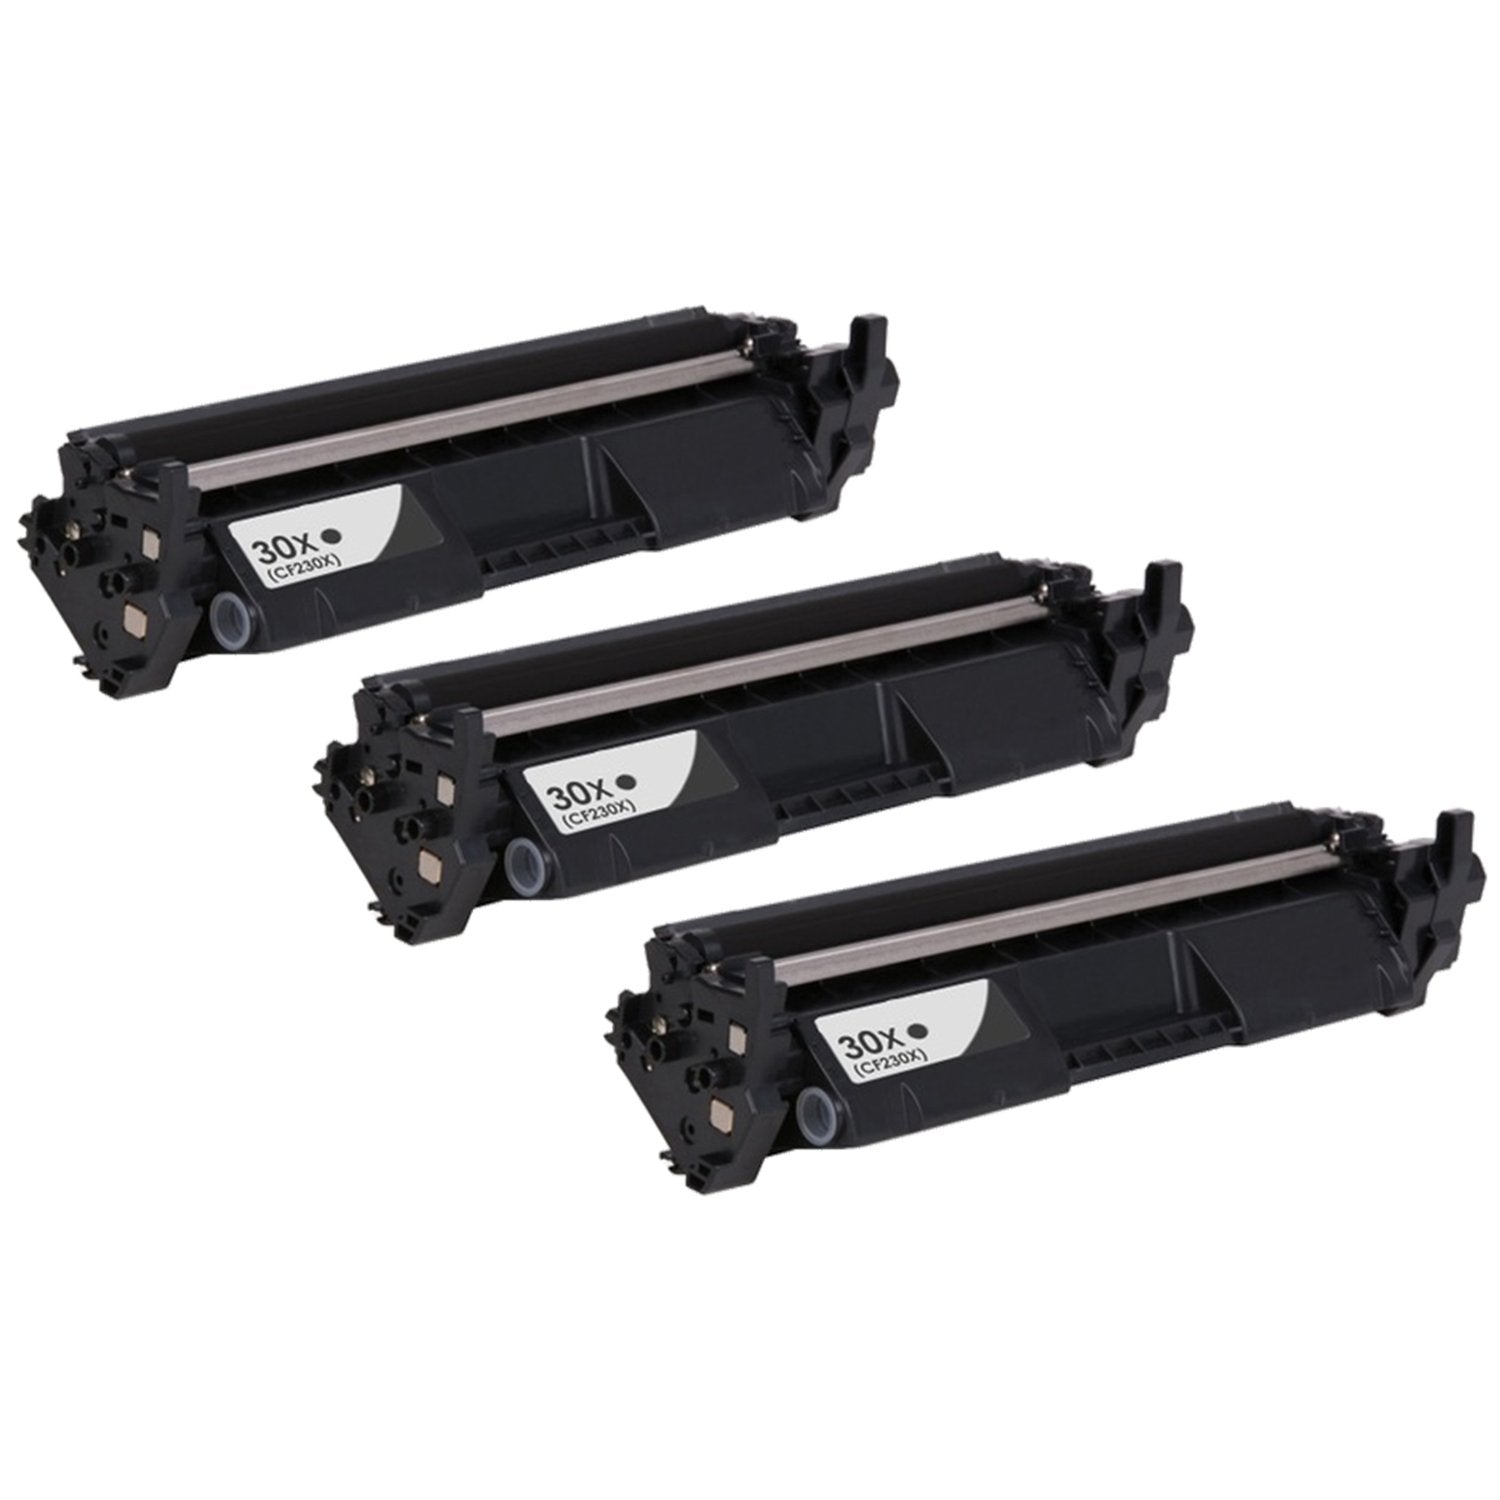 Absolute Toner Compatible CF230X HP 30X High Yield Black Toner Cartridge | Absolute Toner HP Toner Cartridges